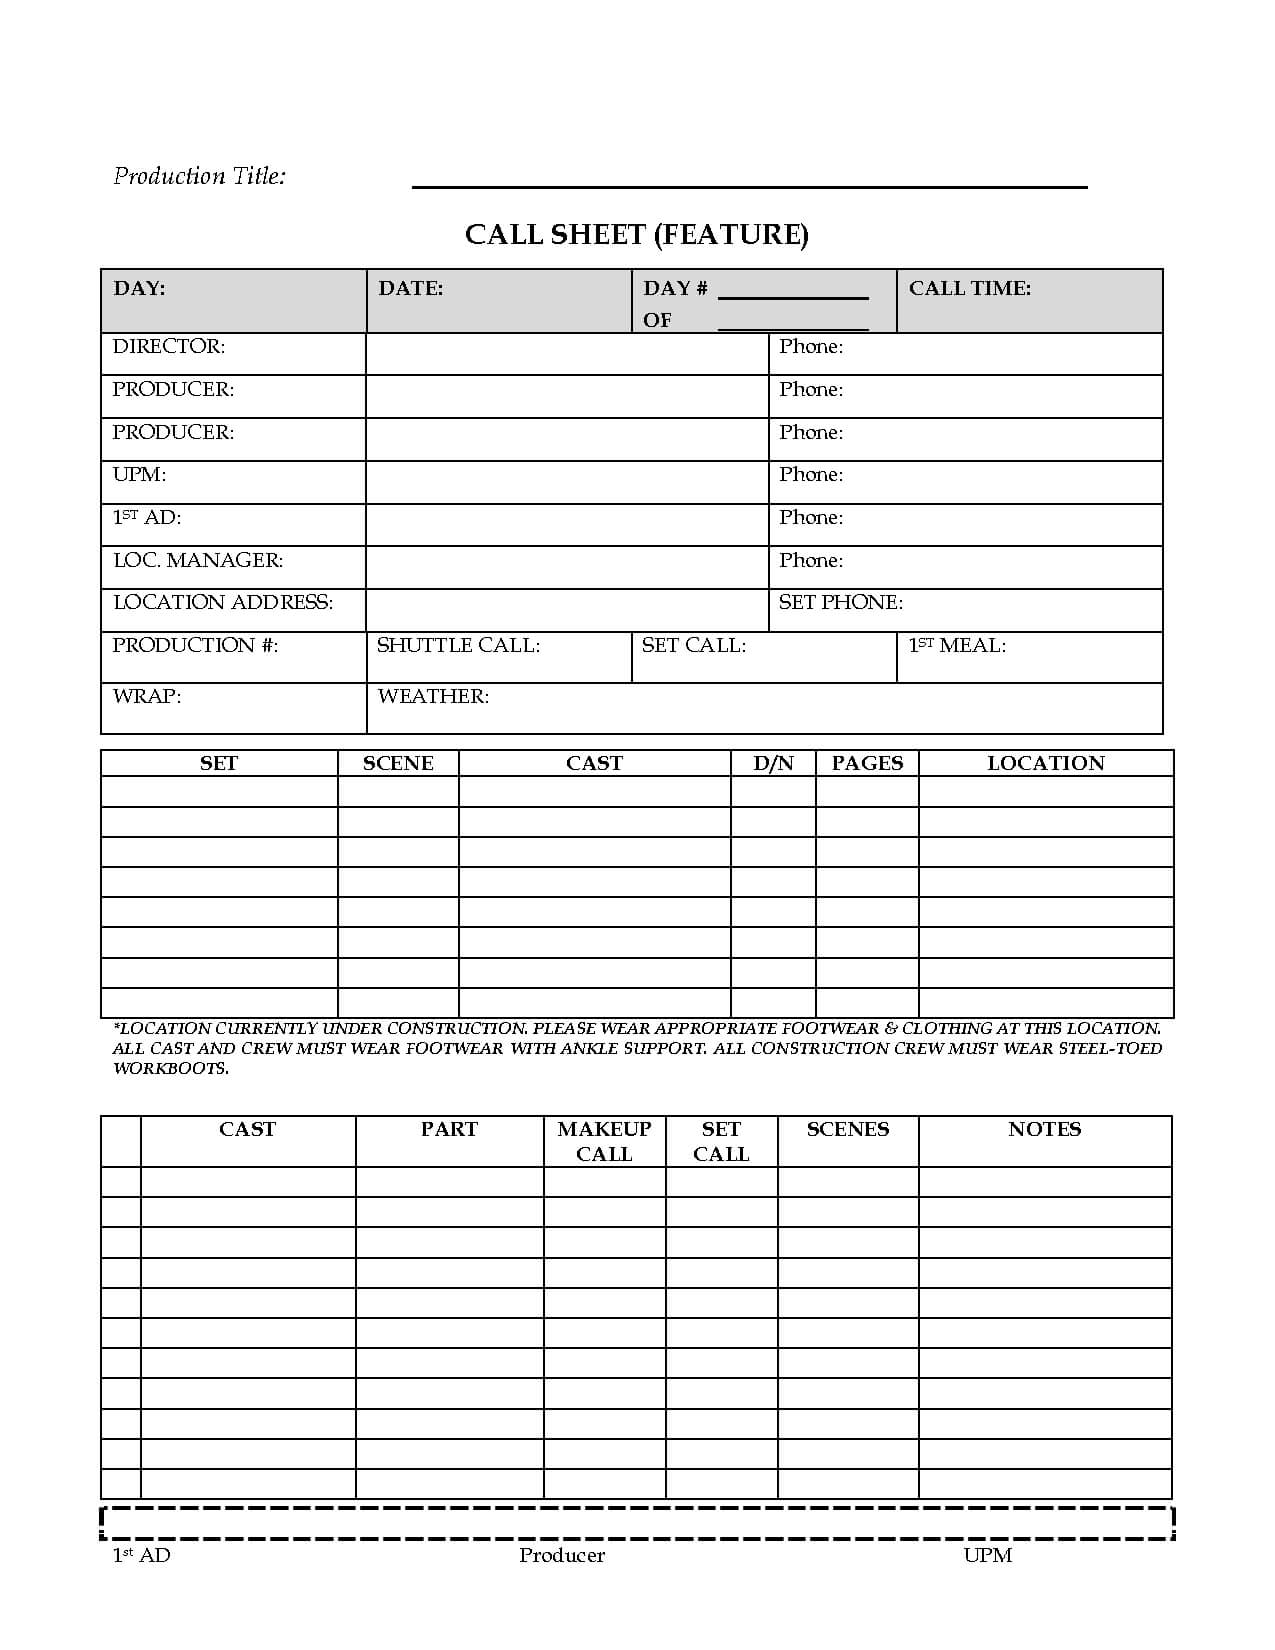 Awesome Call Sheet (Feature) Template Sample For Film Pertaining To Film Call Sheet Template Word